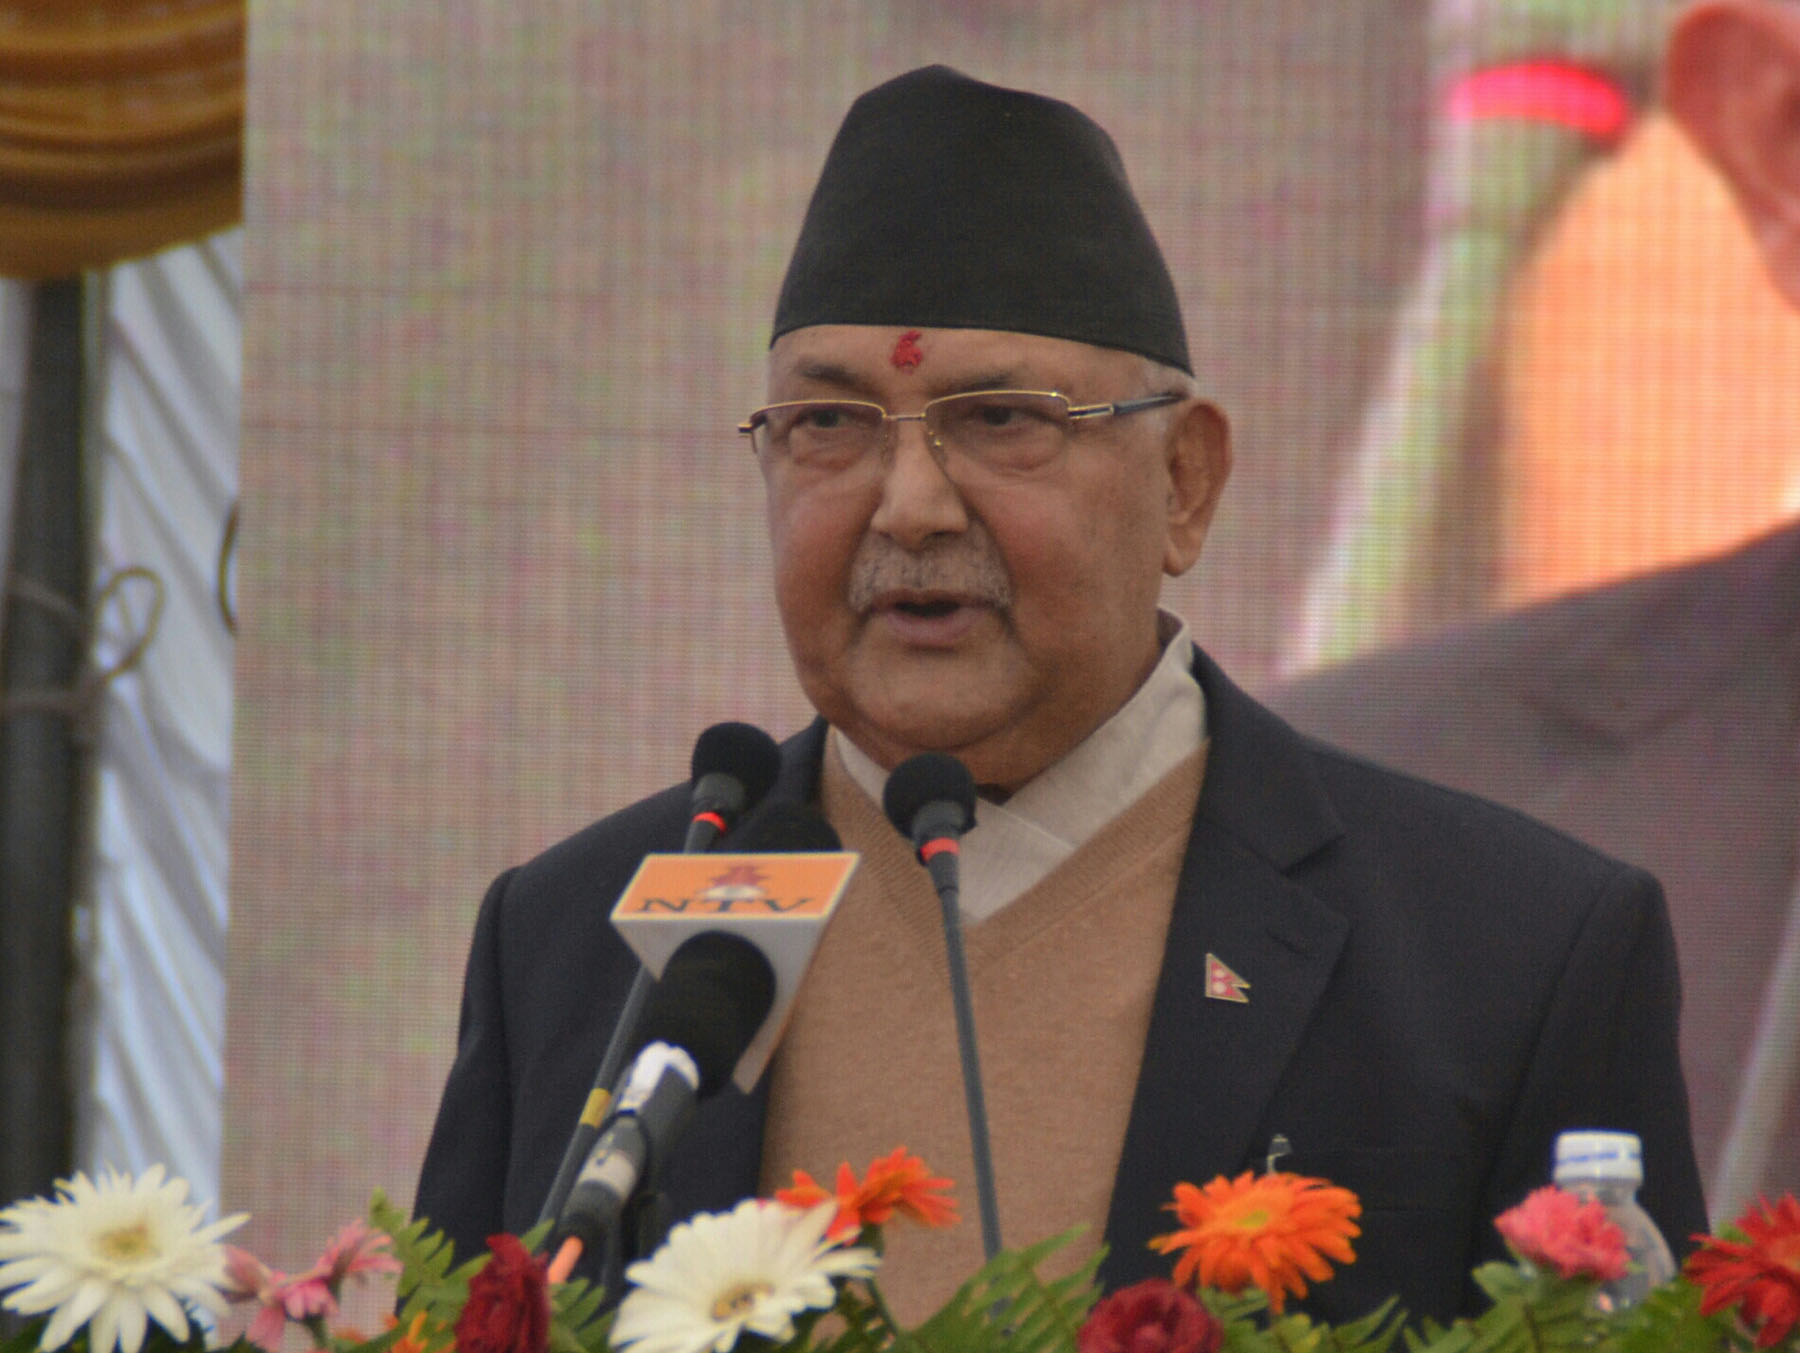 Grand preparations for Xi’s visit is on, says PM Oli